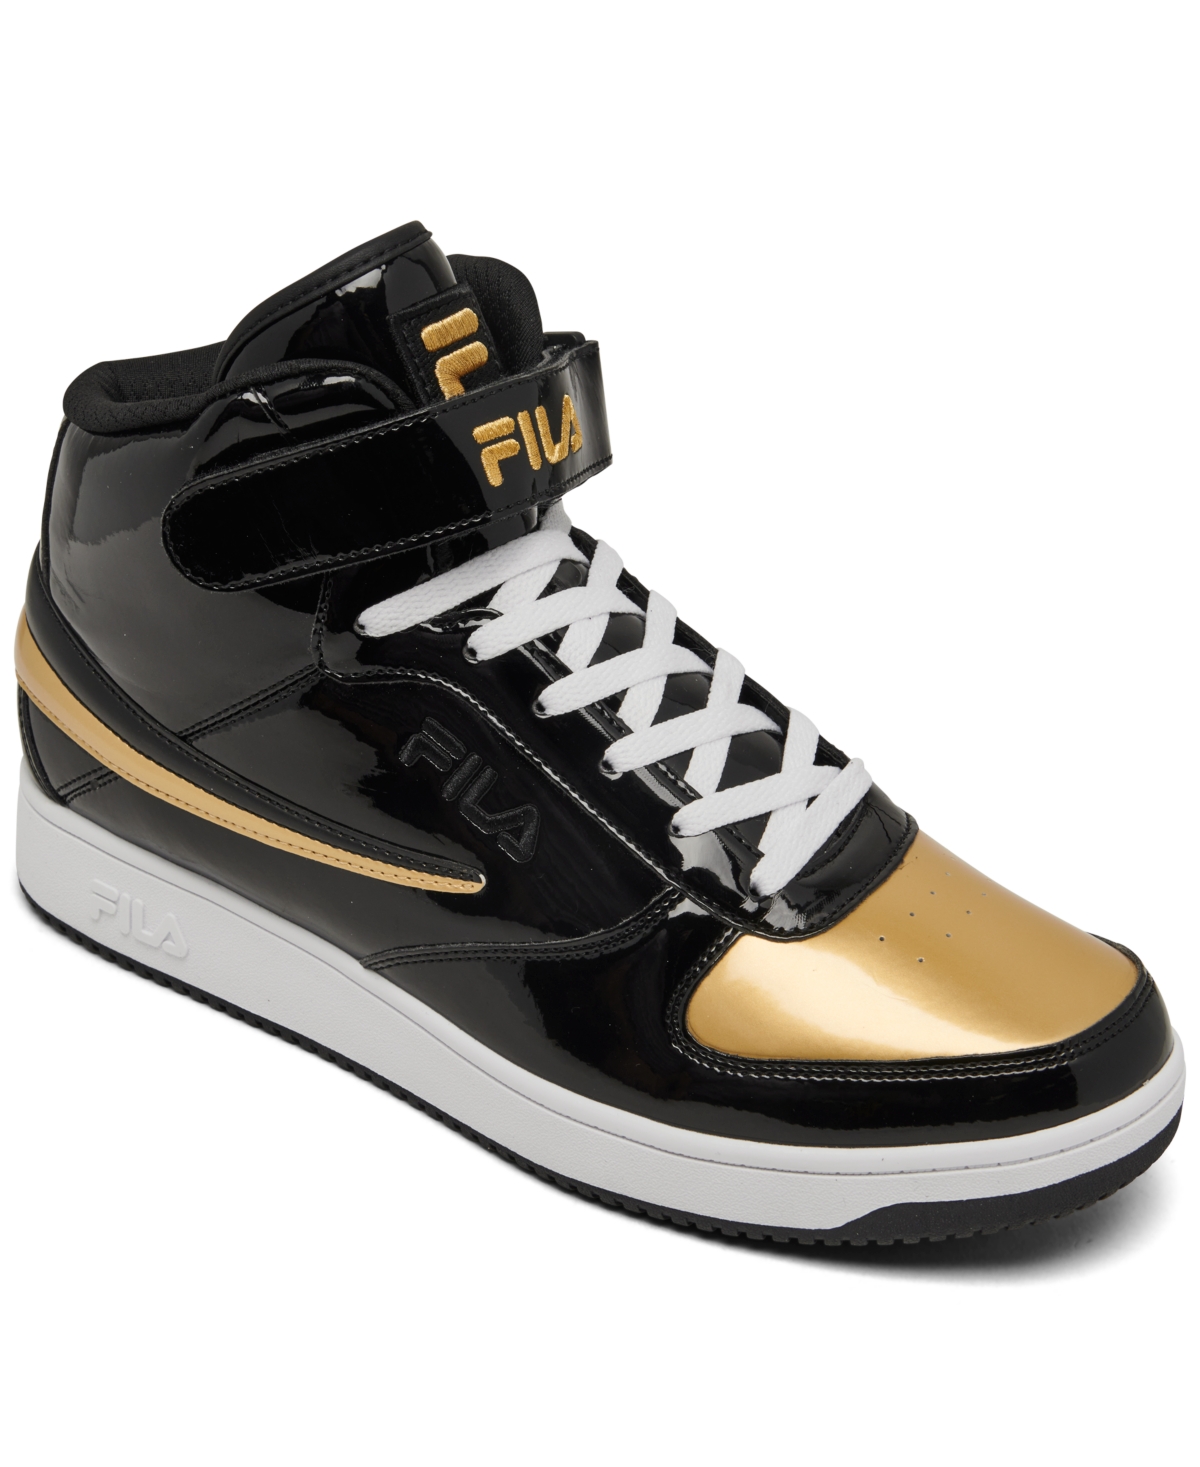 Men's A-High Patent Leather High Top Casual Sneakers from Finish Line - Black, Gold